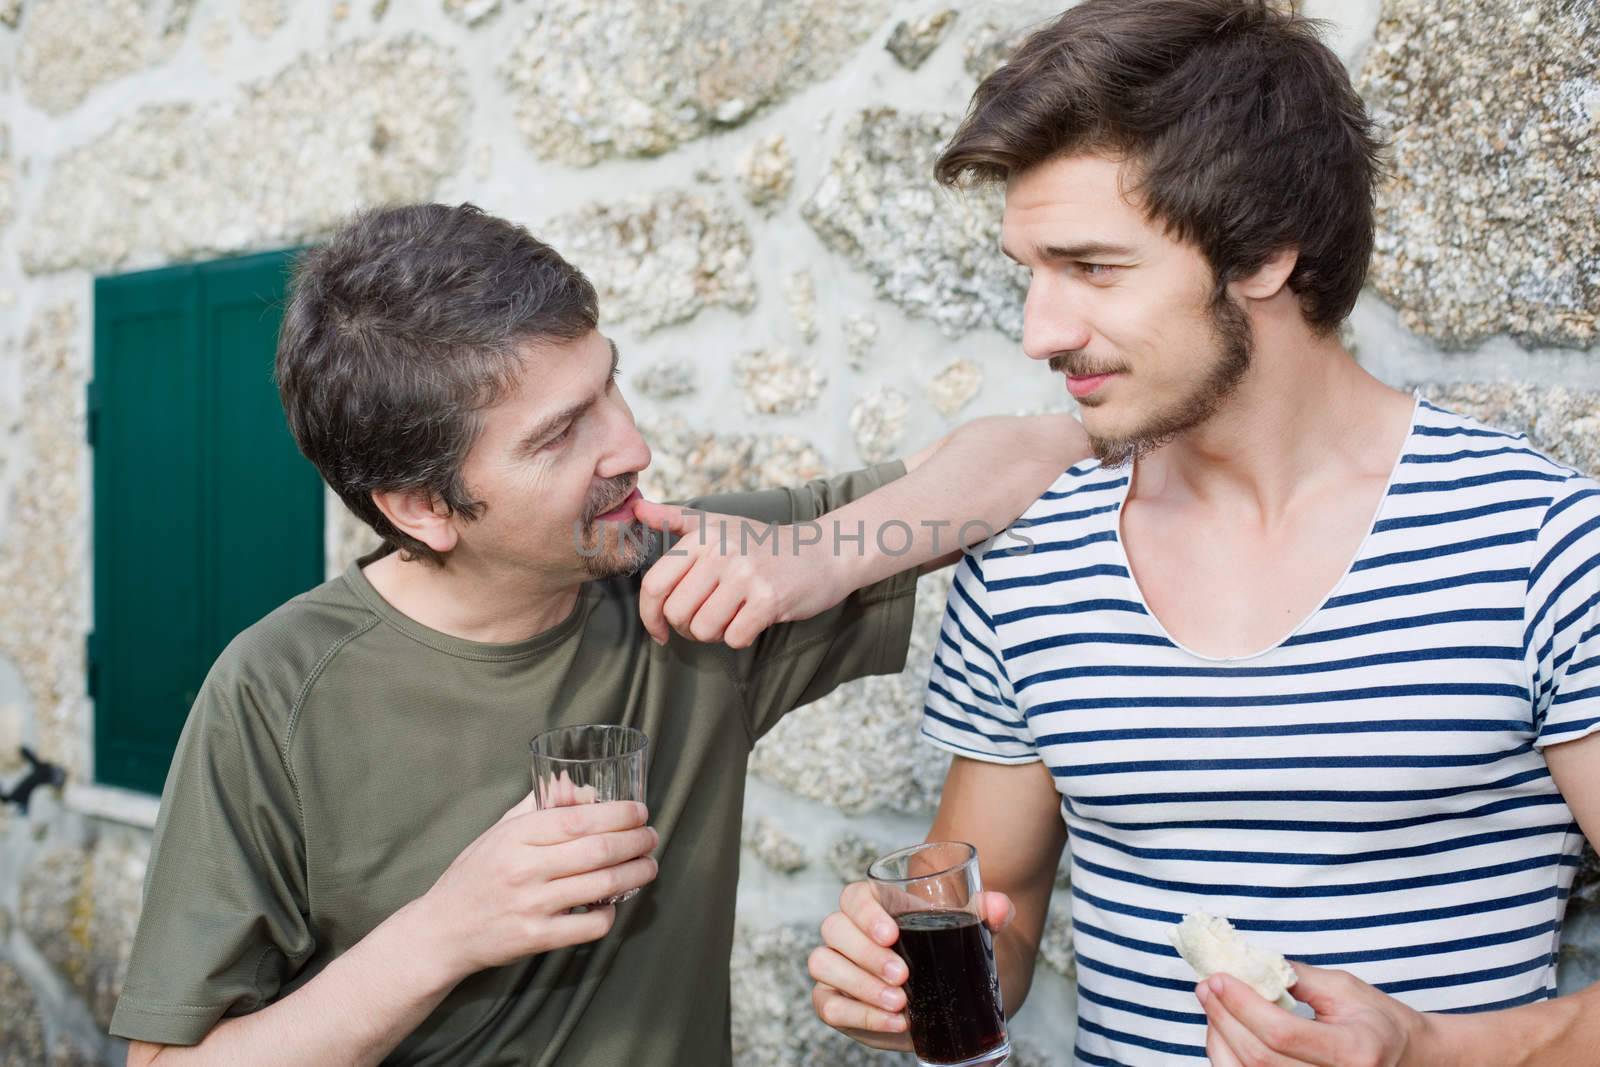 two friends having a drink and talking outdoors